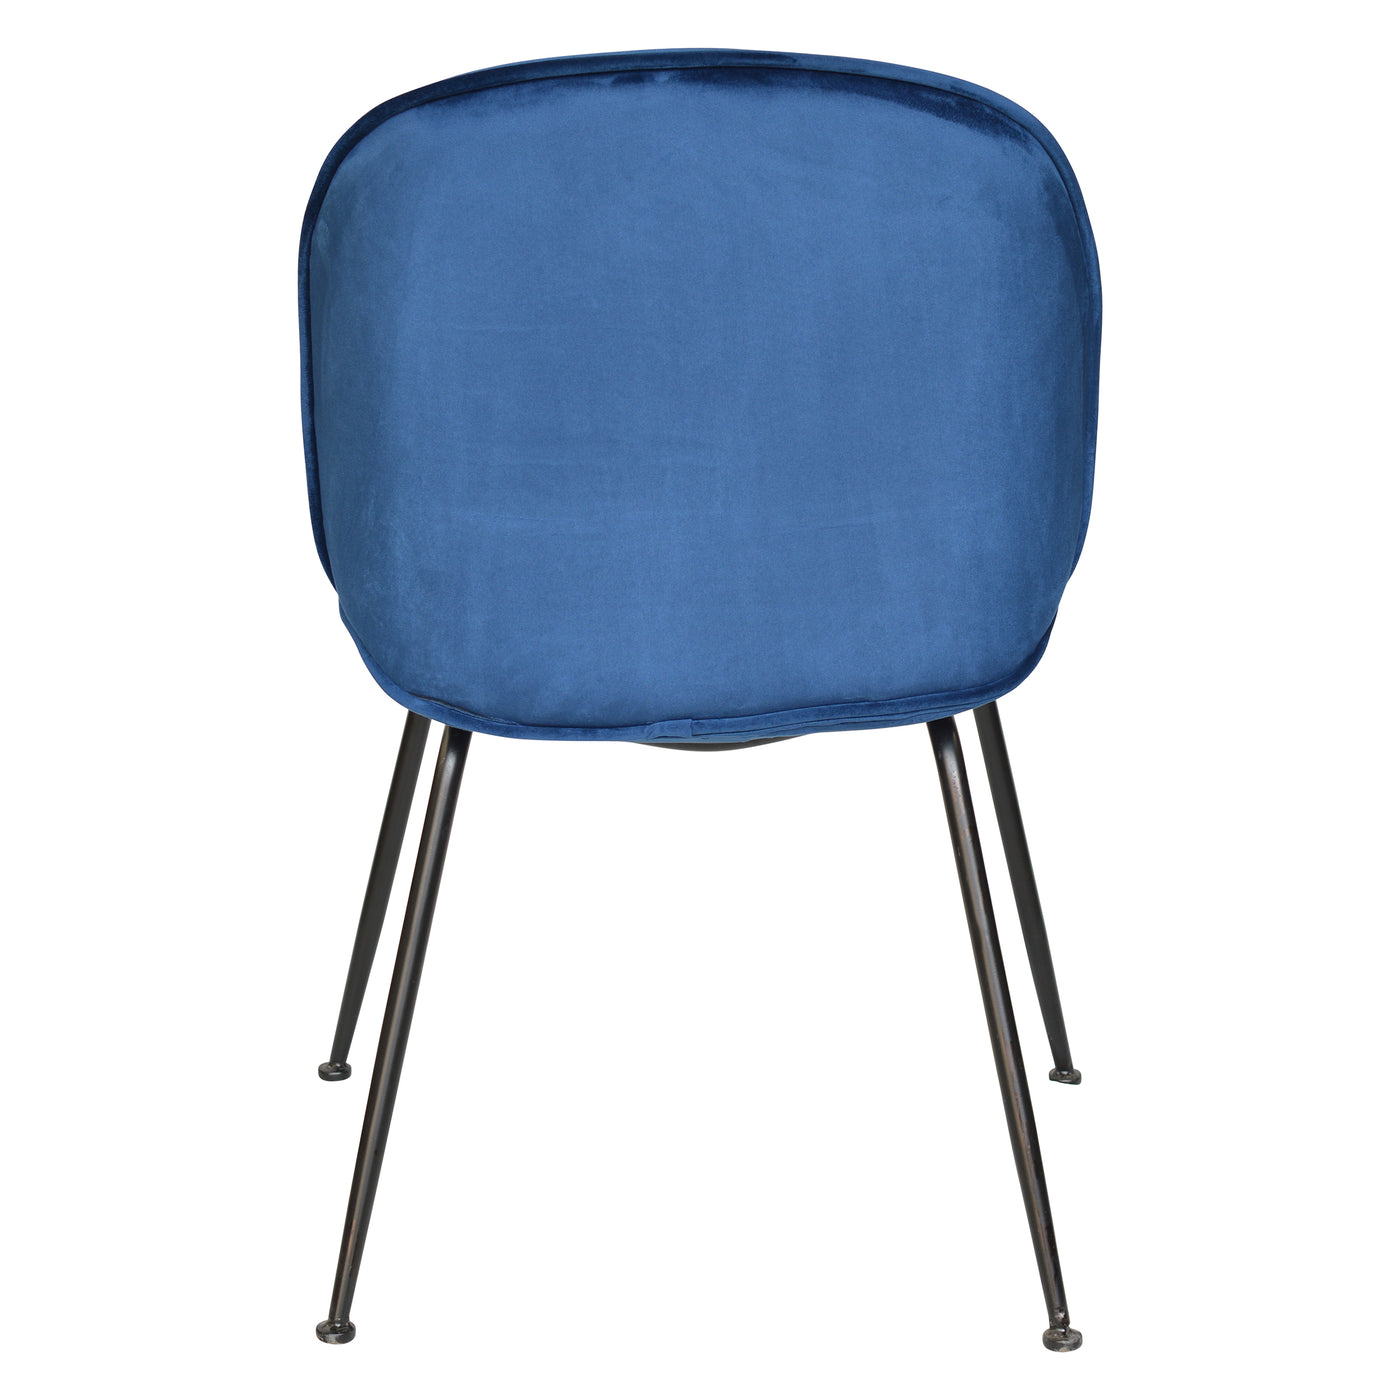 Colombo Dining Chair Navy - Future Classics Furniture